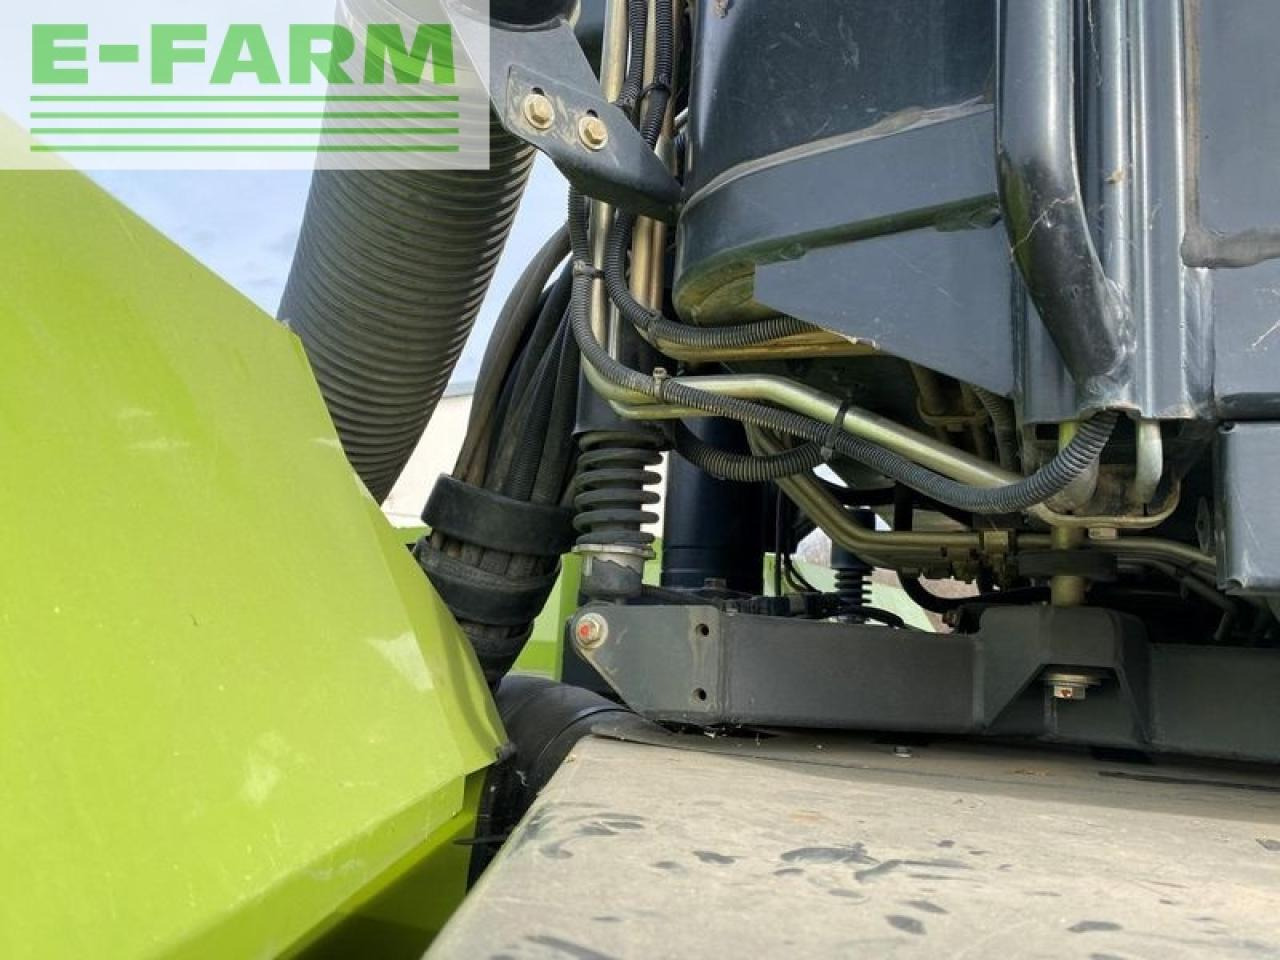 Farm tractor CLAAS xerion 3800 vc: picture 26